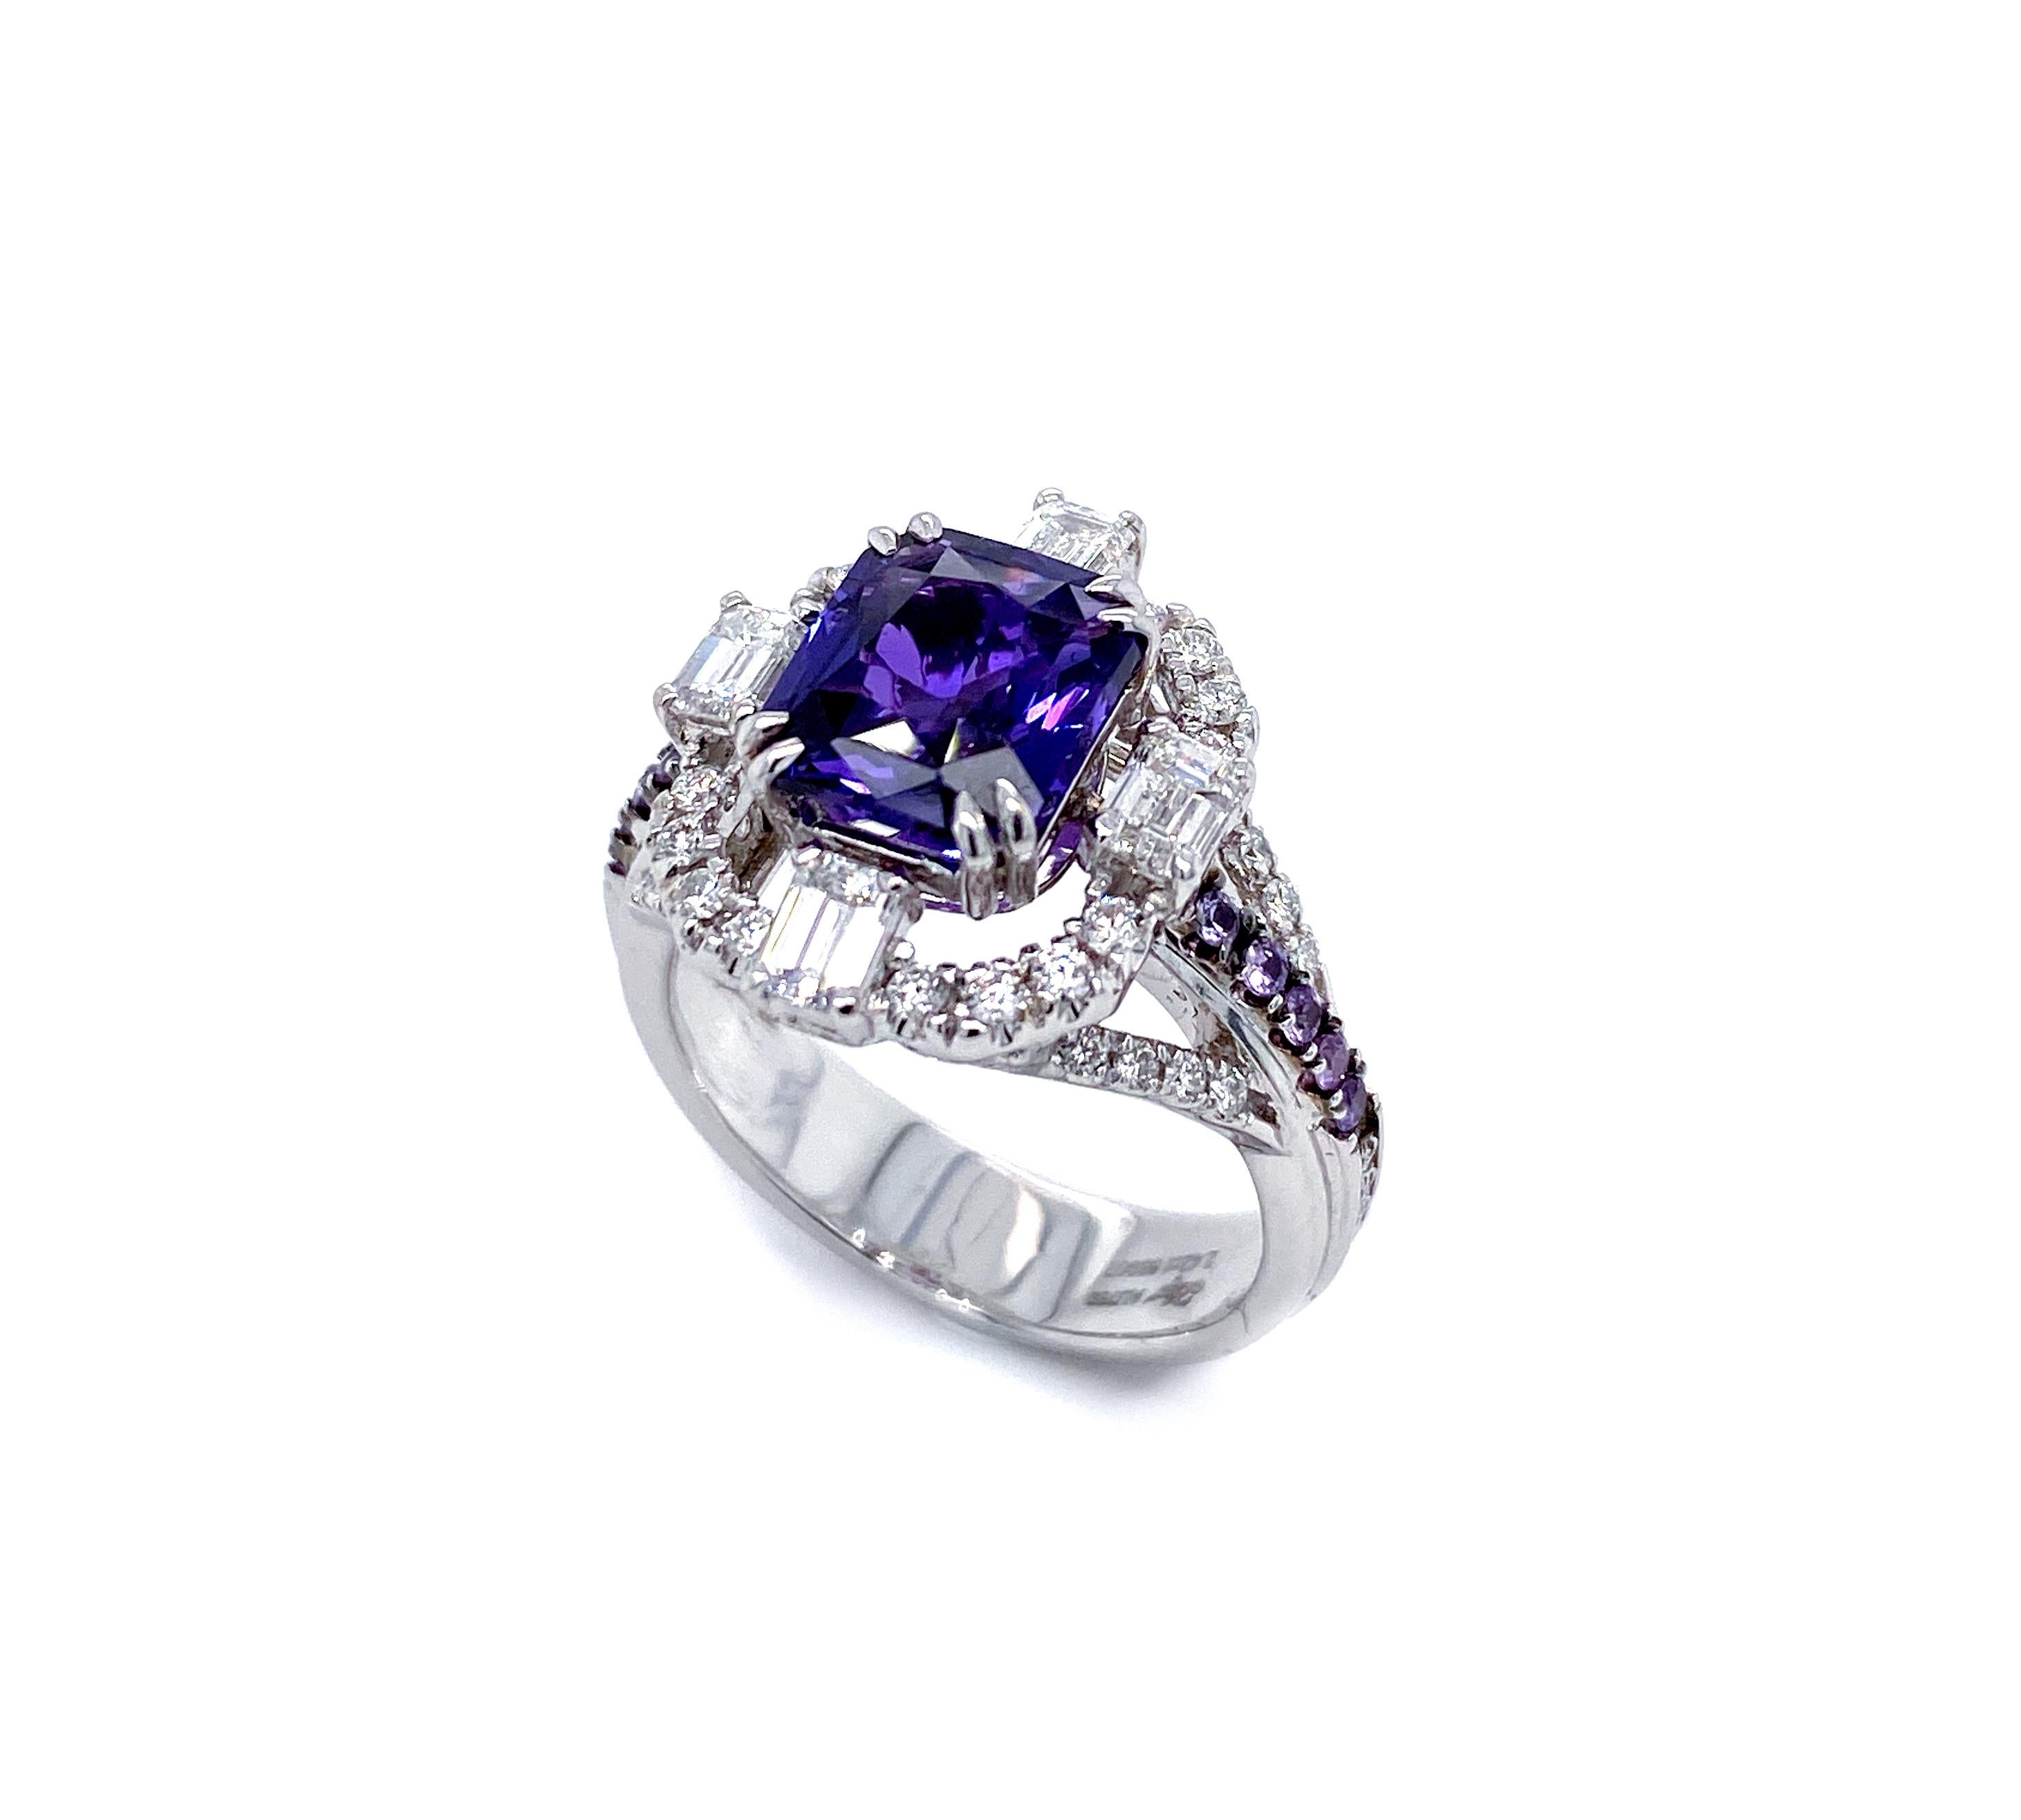 Women's or Men's 2.42 Carat Color-Changing Violet Sapphire and Diamond Collectible Ring